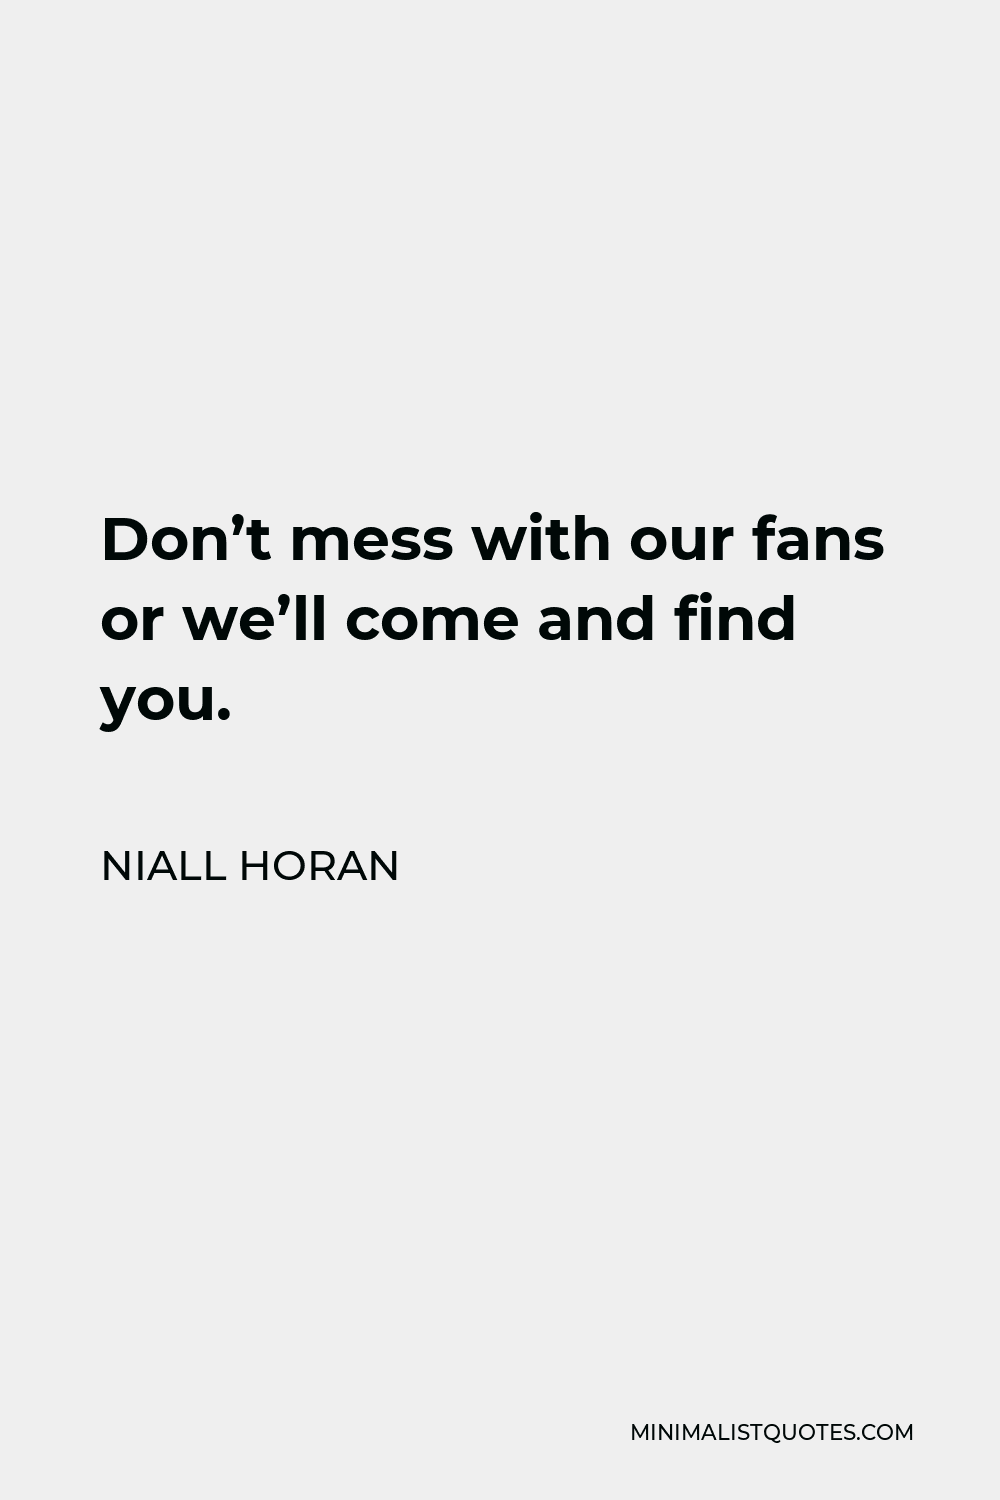 Niall Horan Quote - Don’t mess with our fans or we’ll come and find you.